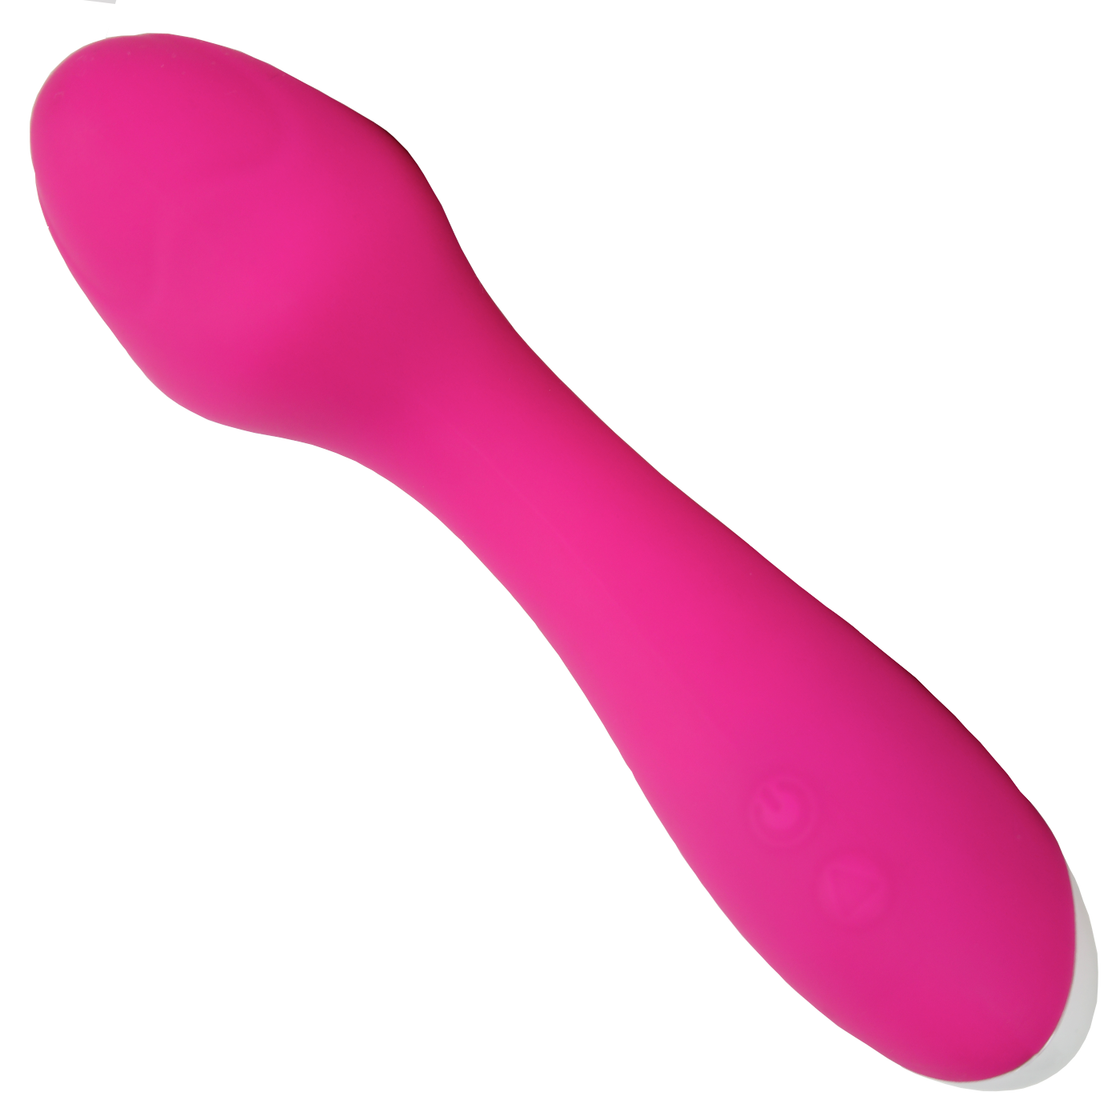 Photo of rechargeable gspot vibrator by TooTimid